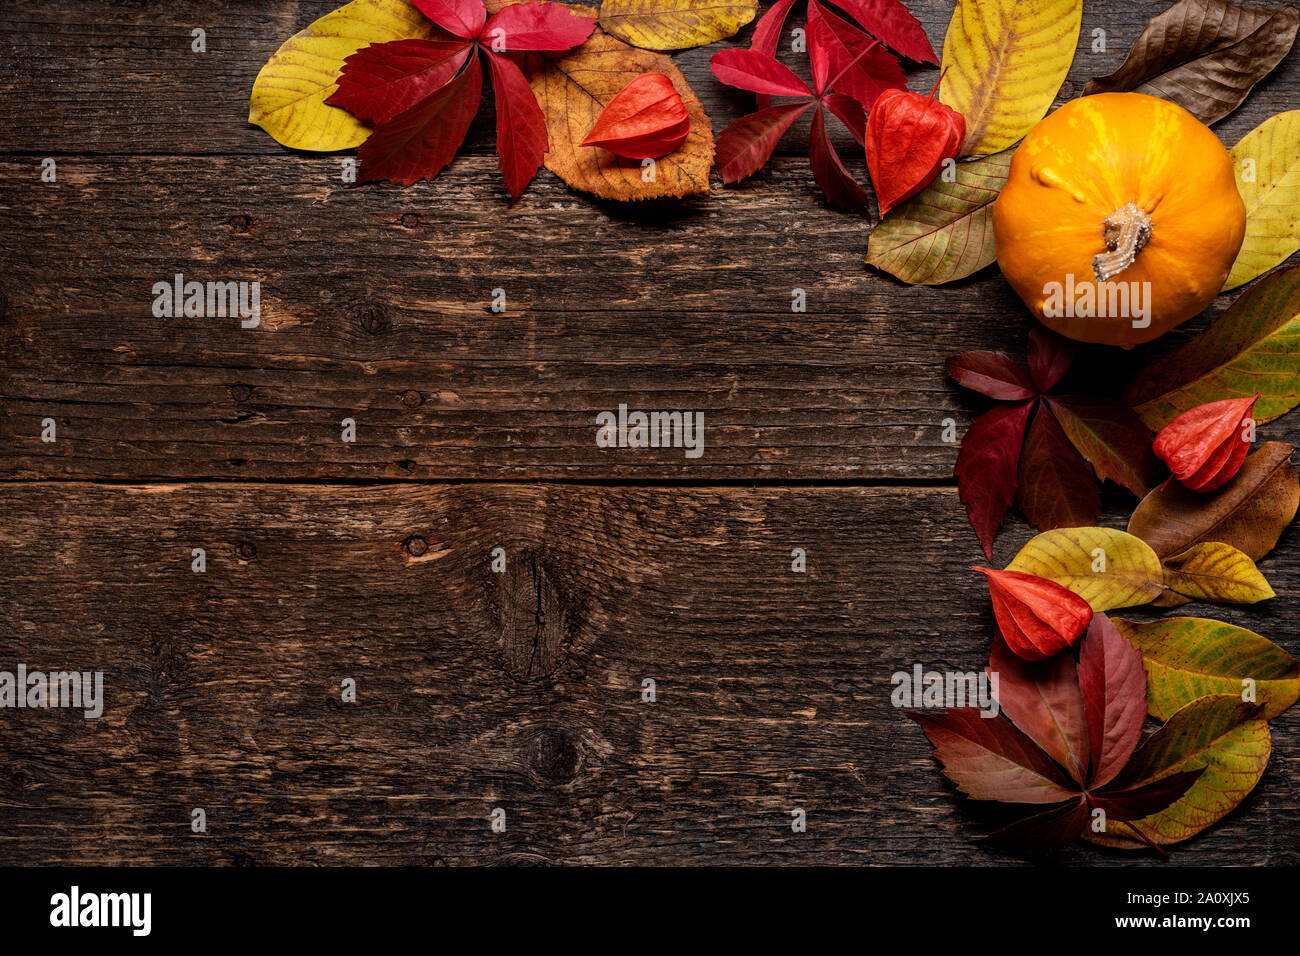 Happy Thanksgiving. Pumpkin and fallen leaves on dark wooden background. Autumn vegetables and seasonal decorations. Autumn Harvest and Holiday still Stock Photo